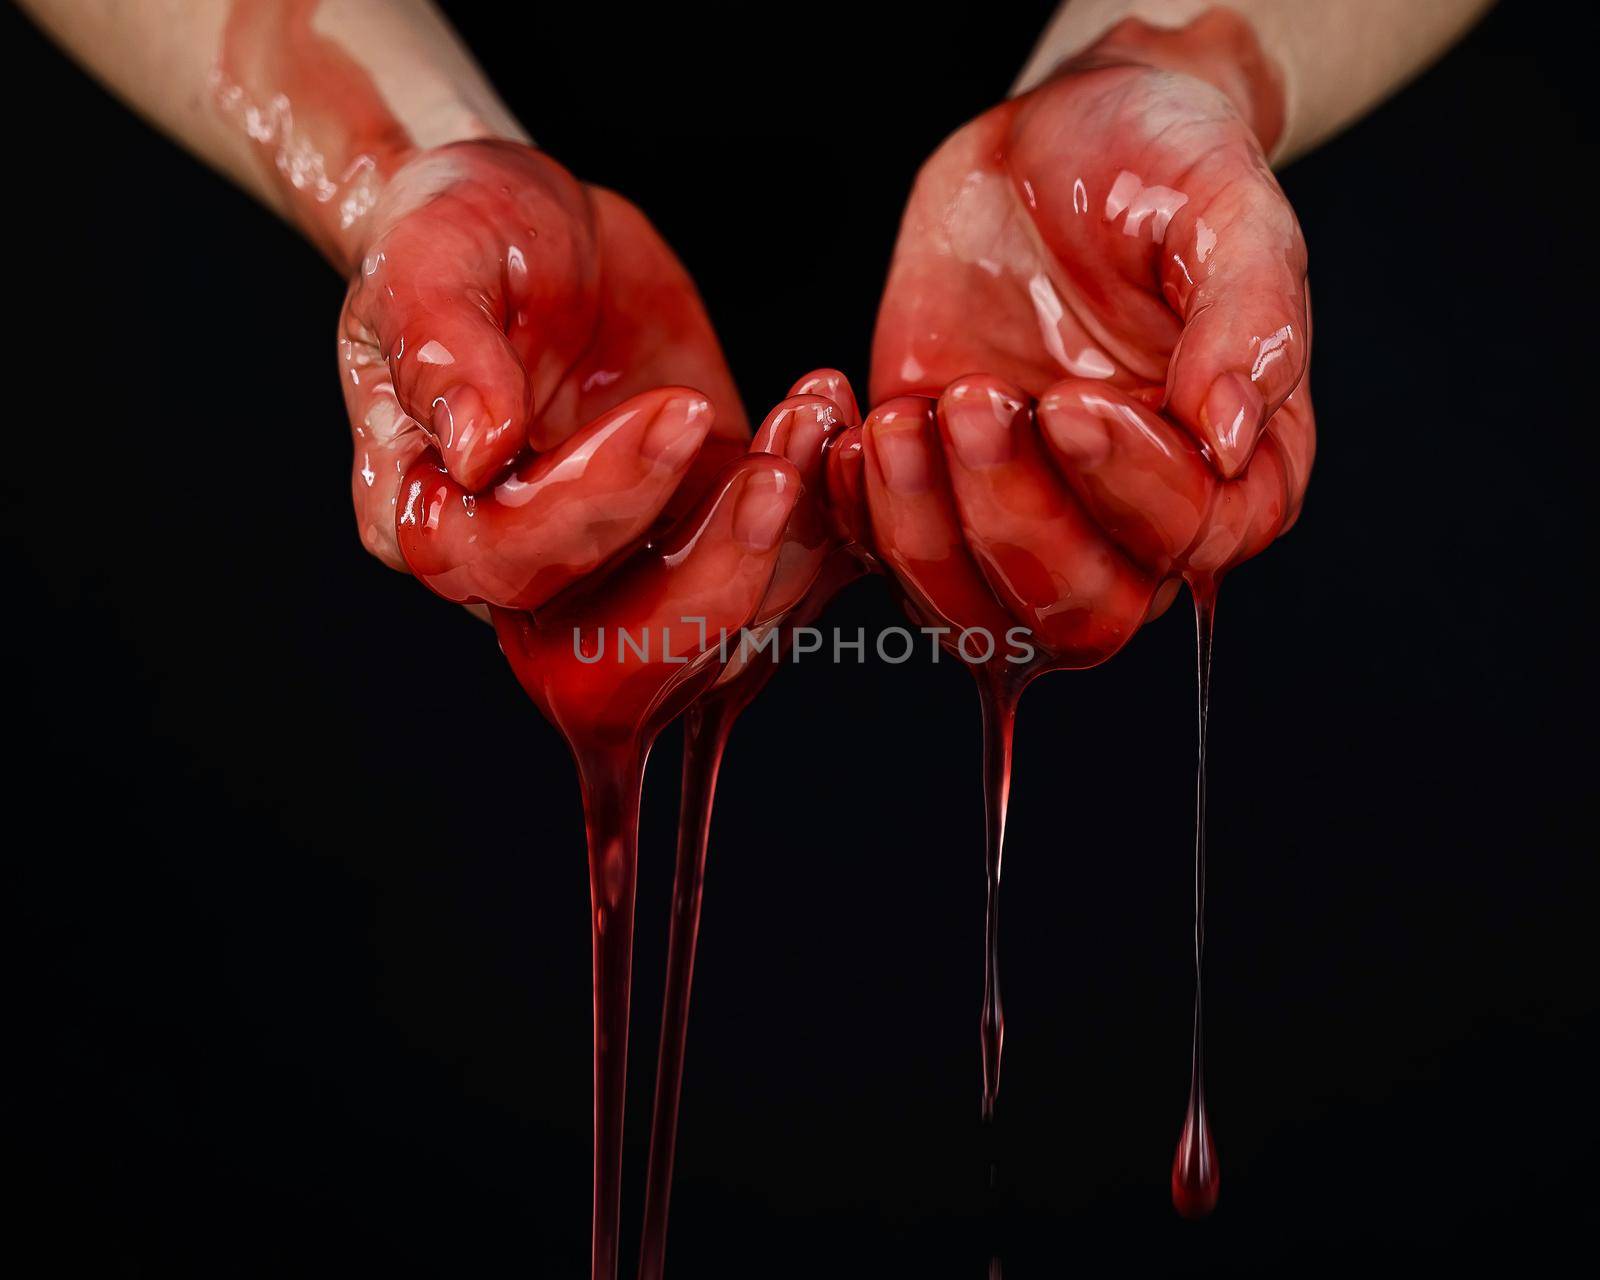 Women's hands in a viscous red liquid similar to blood